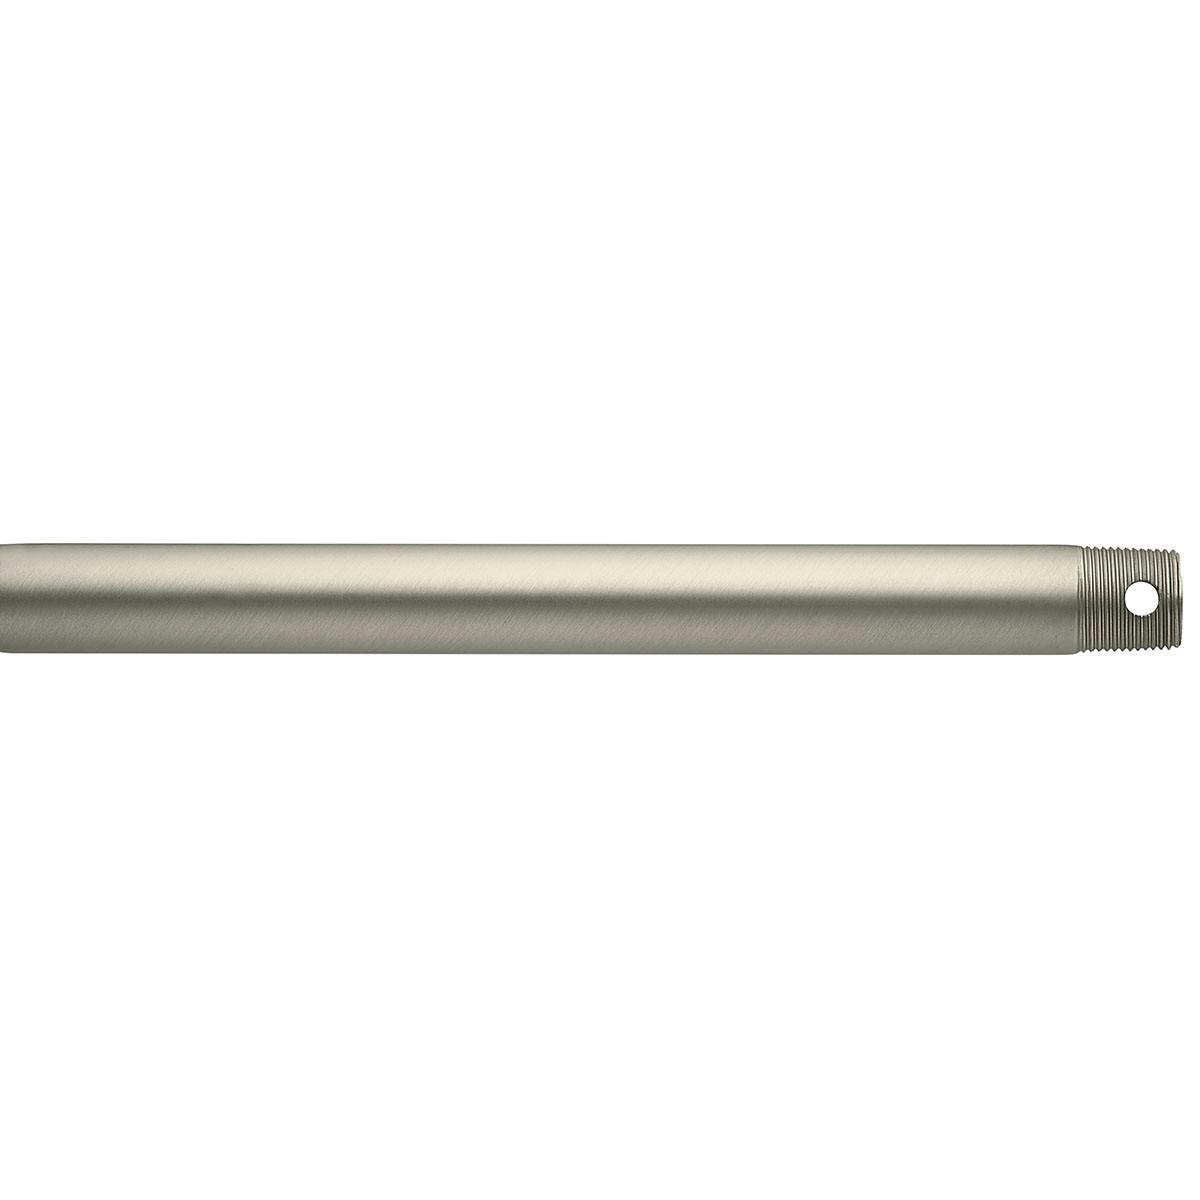 Dual Threaded 12" Downrod Brushed Nickel on a white background